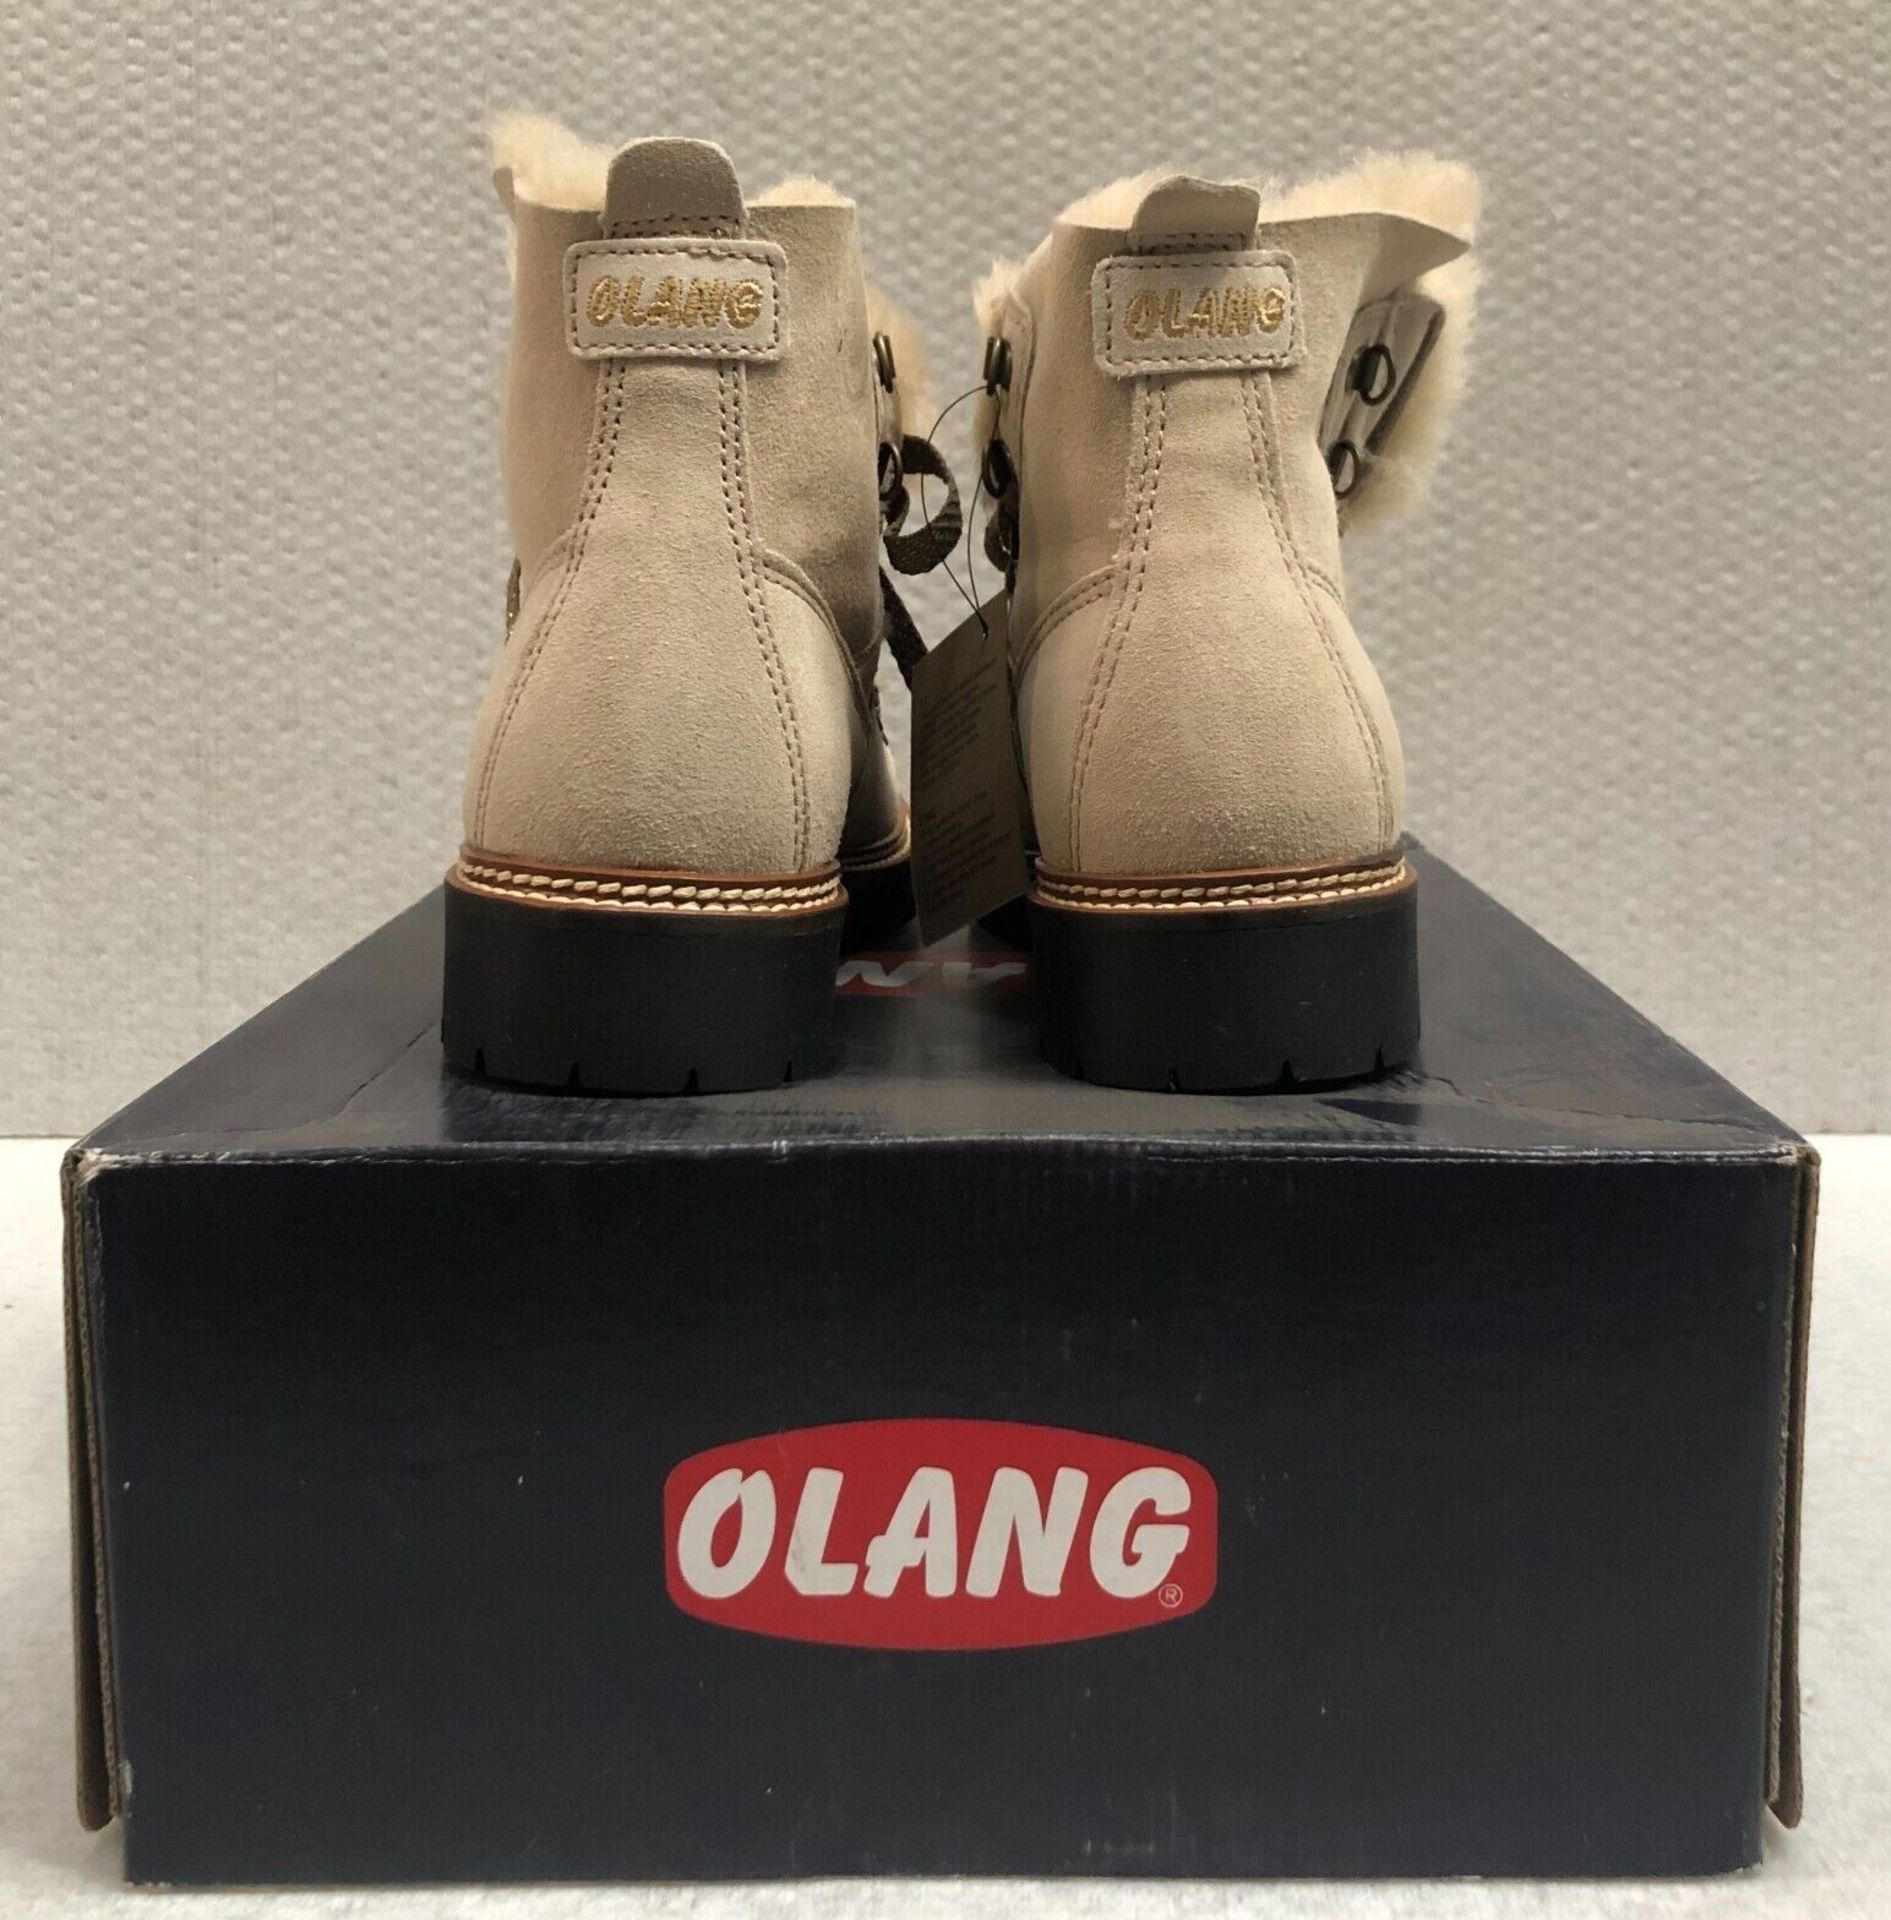 1 x Pair of Designer Olang Women's Winter Boots - Aurora.Lux 88 Beige - Euro Size 39 - New Boxed - Image 3 of 6